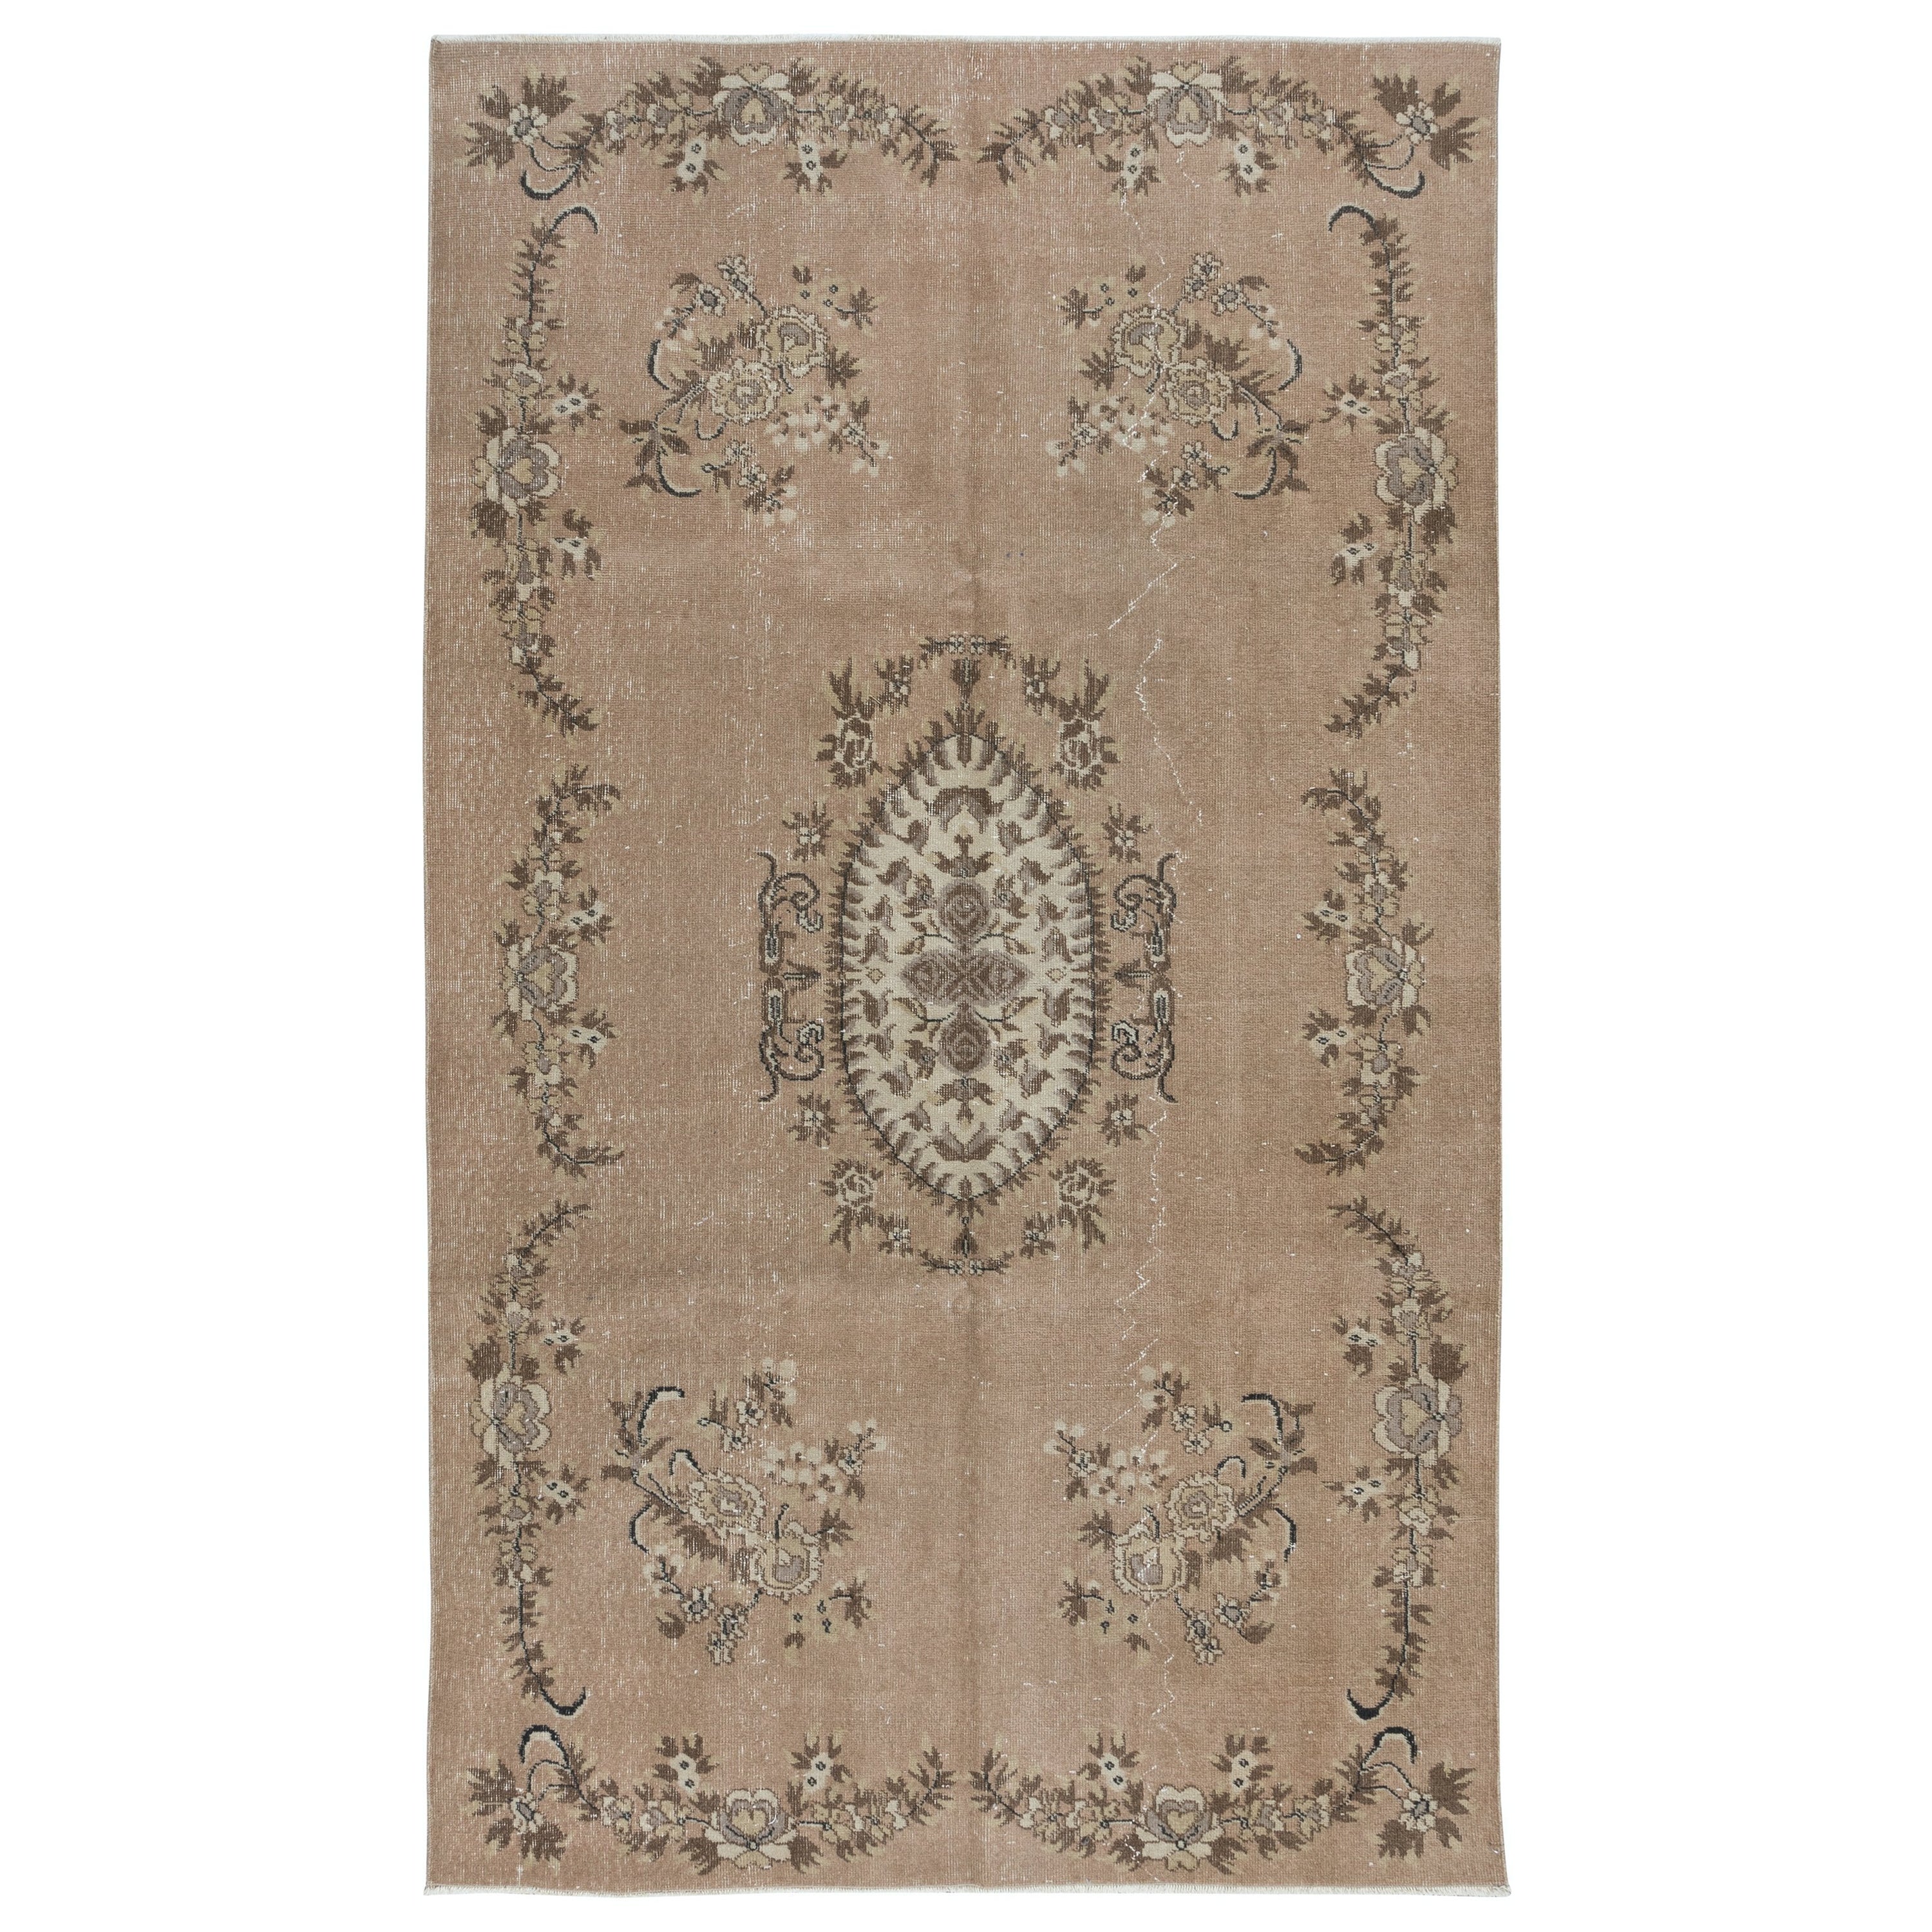 5.5x9 Ft Aubusson French Rug, Handmade Turkish Carpet for Country Homes & Rustic For Sale